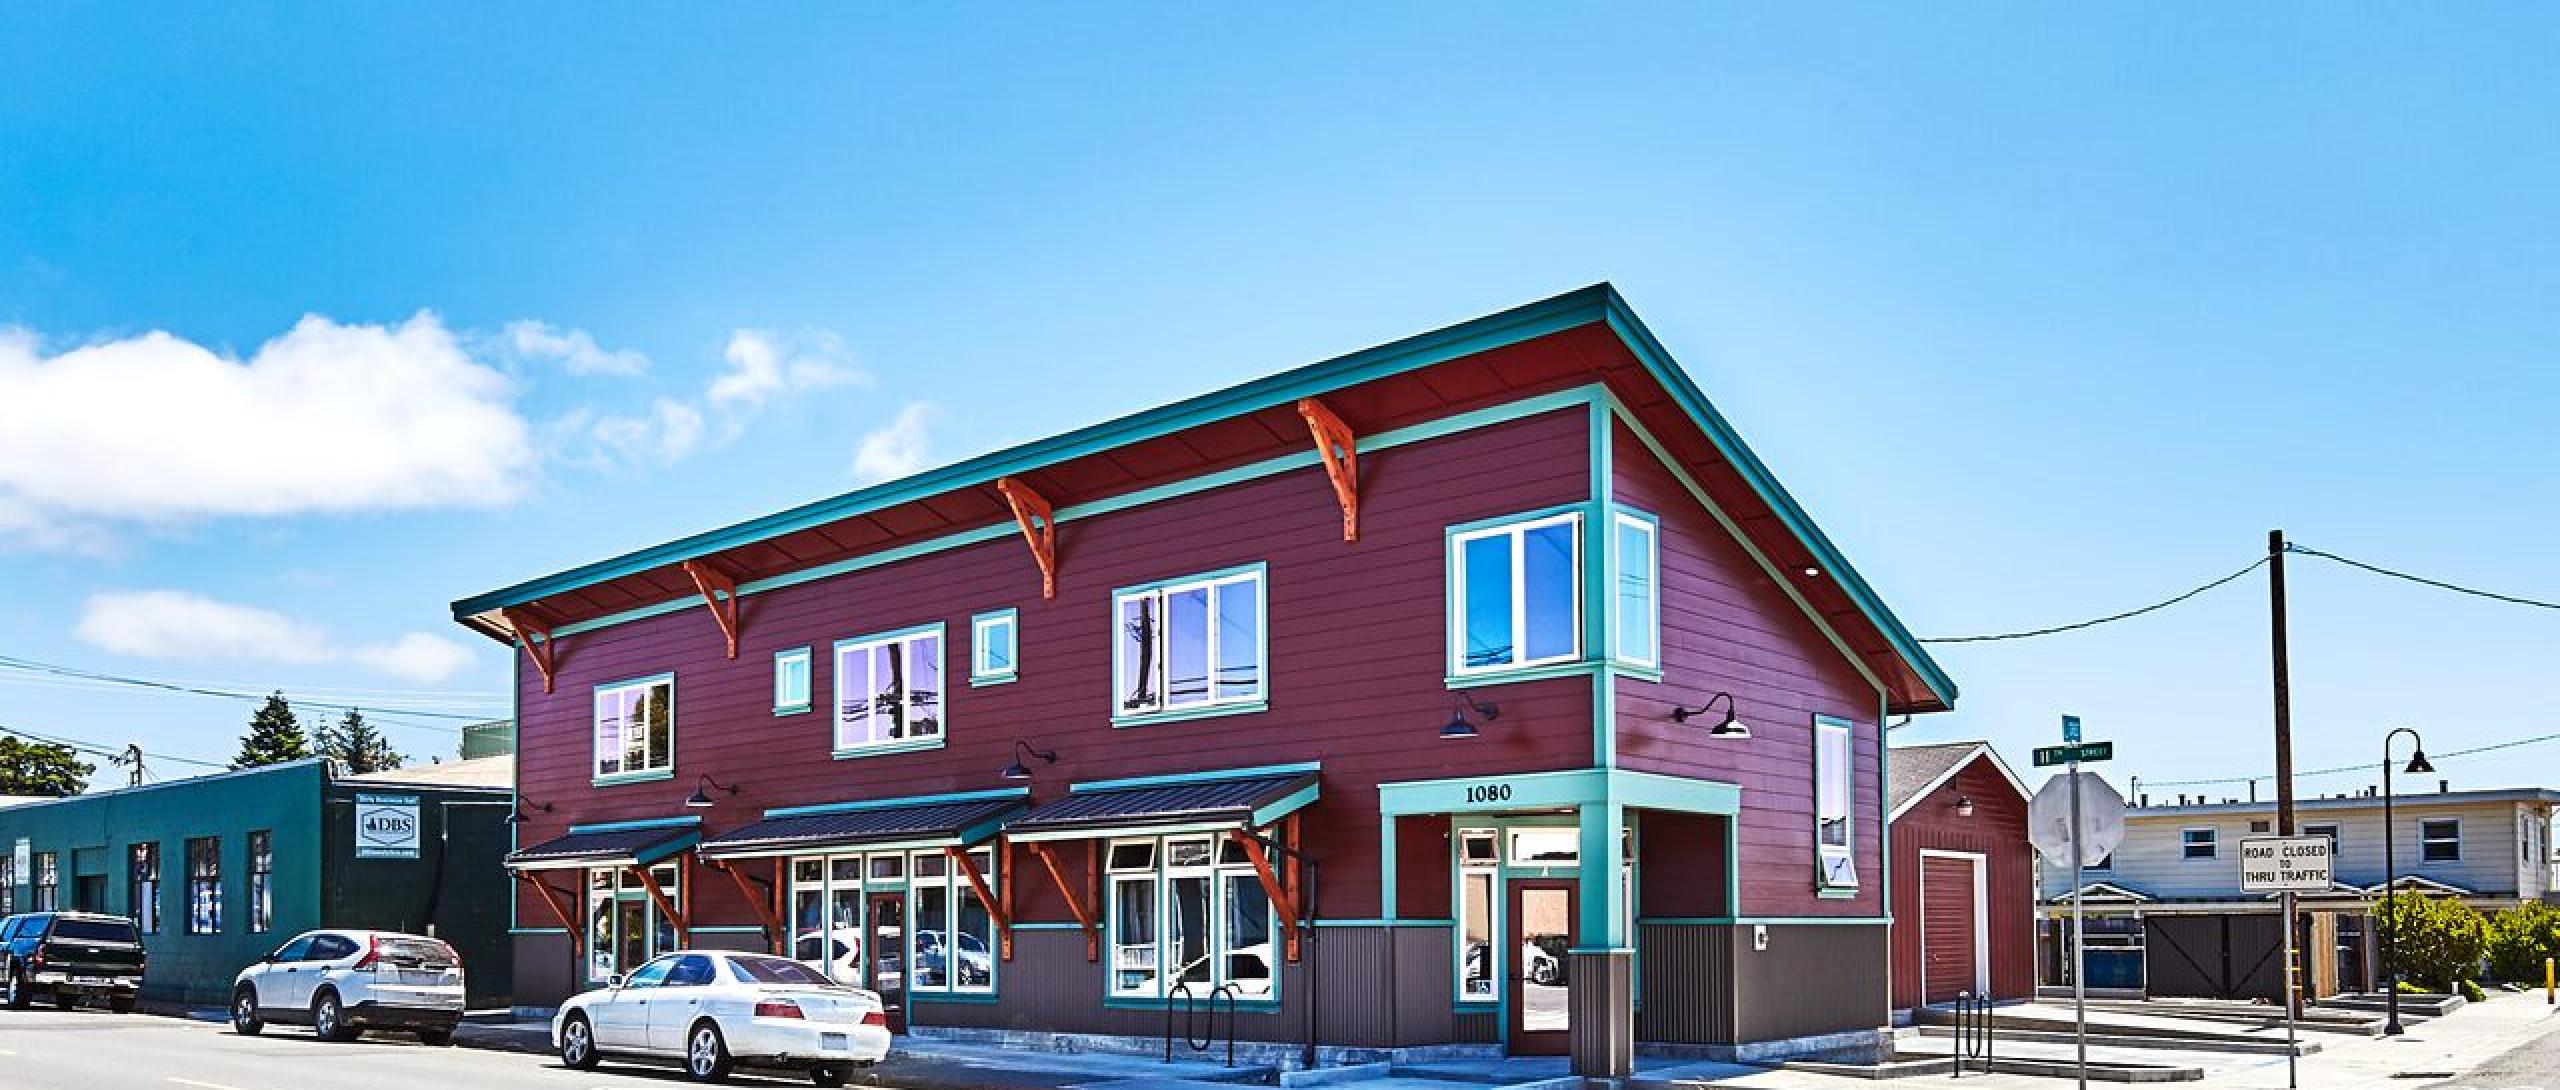 3-Suite Office Building in Arcata, CA.  Burgandy with Teal Trim beautiful Space